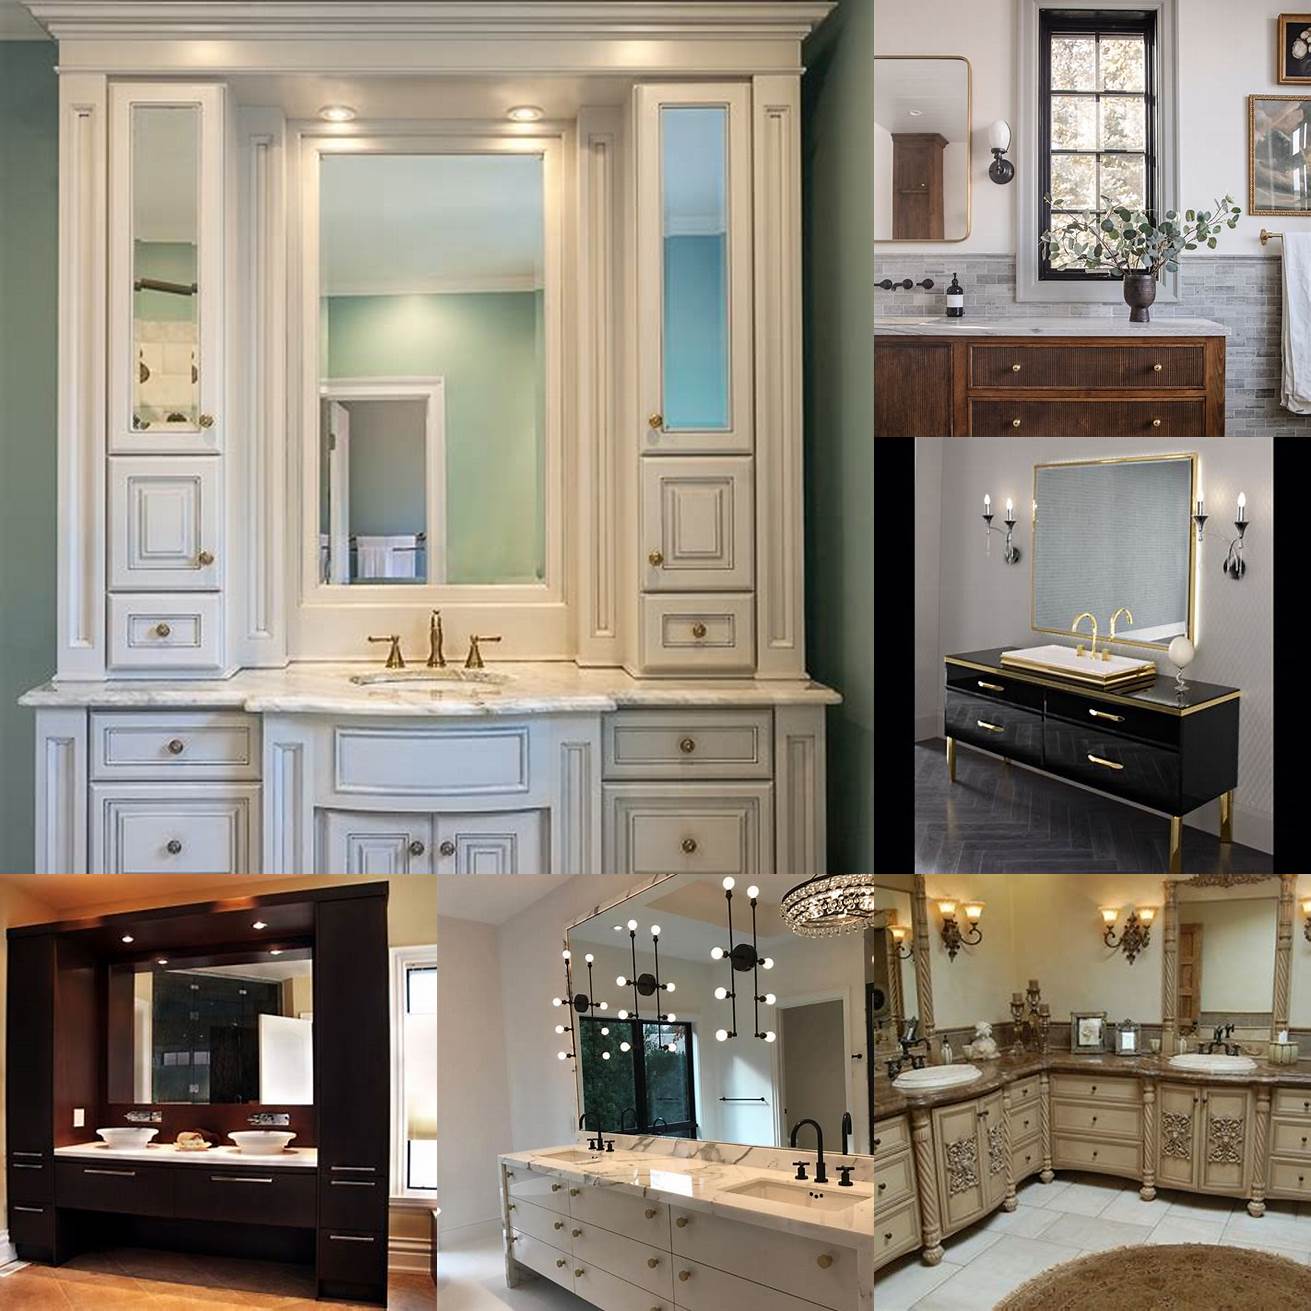 3 Specialty Stores If youre looking for a high-end or custom vanity a specialty store might be your best bet These stores typically have a staff of experts who can help you design the perfect vanity for your bathroom